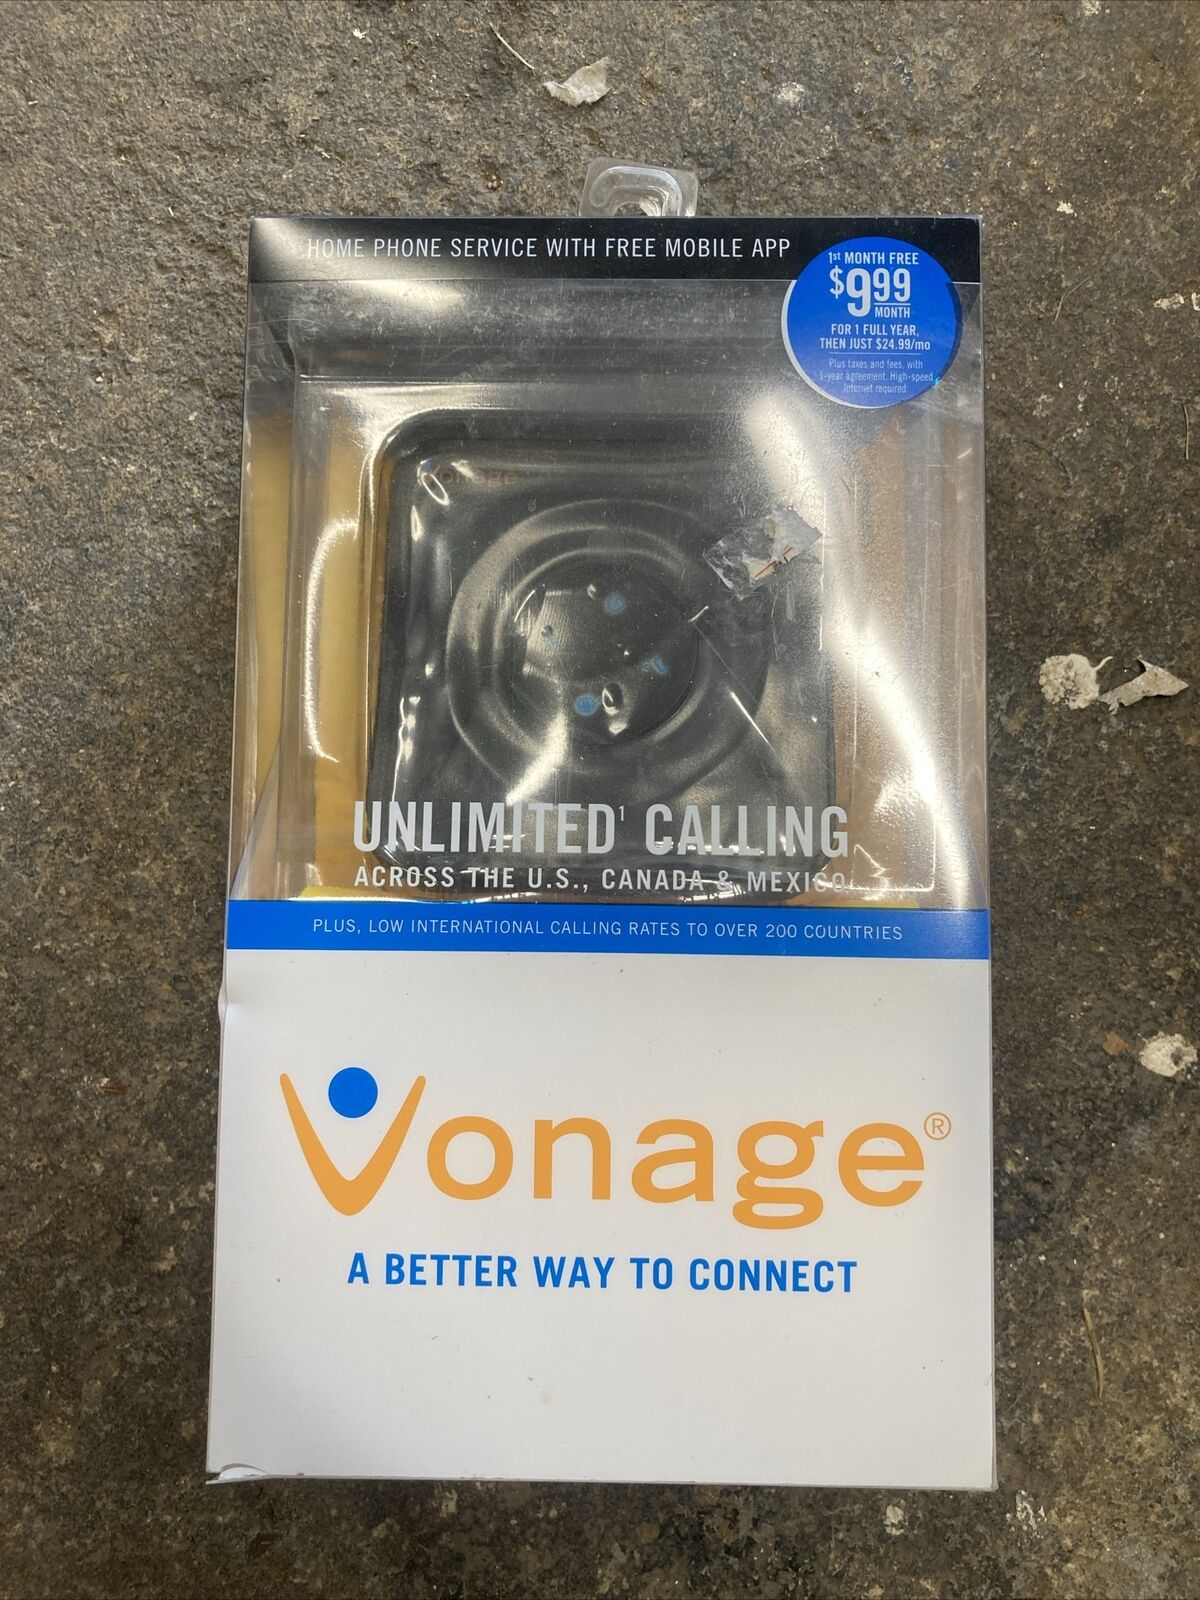 Vonage HT802-VD Home Phone Service w Free Mobile App New